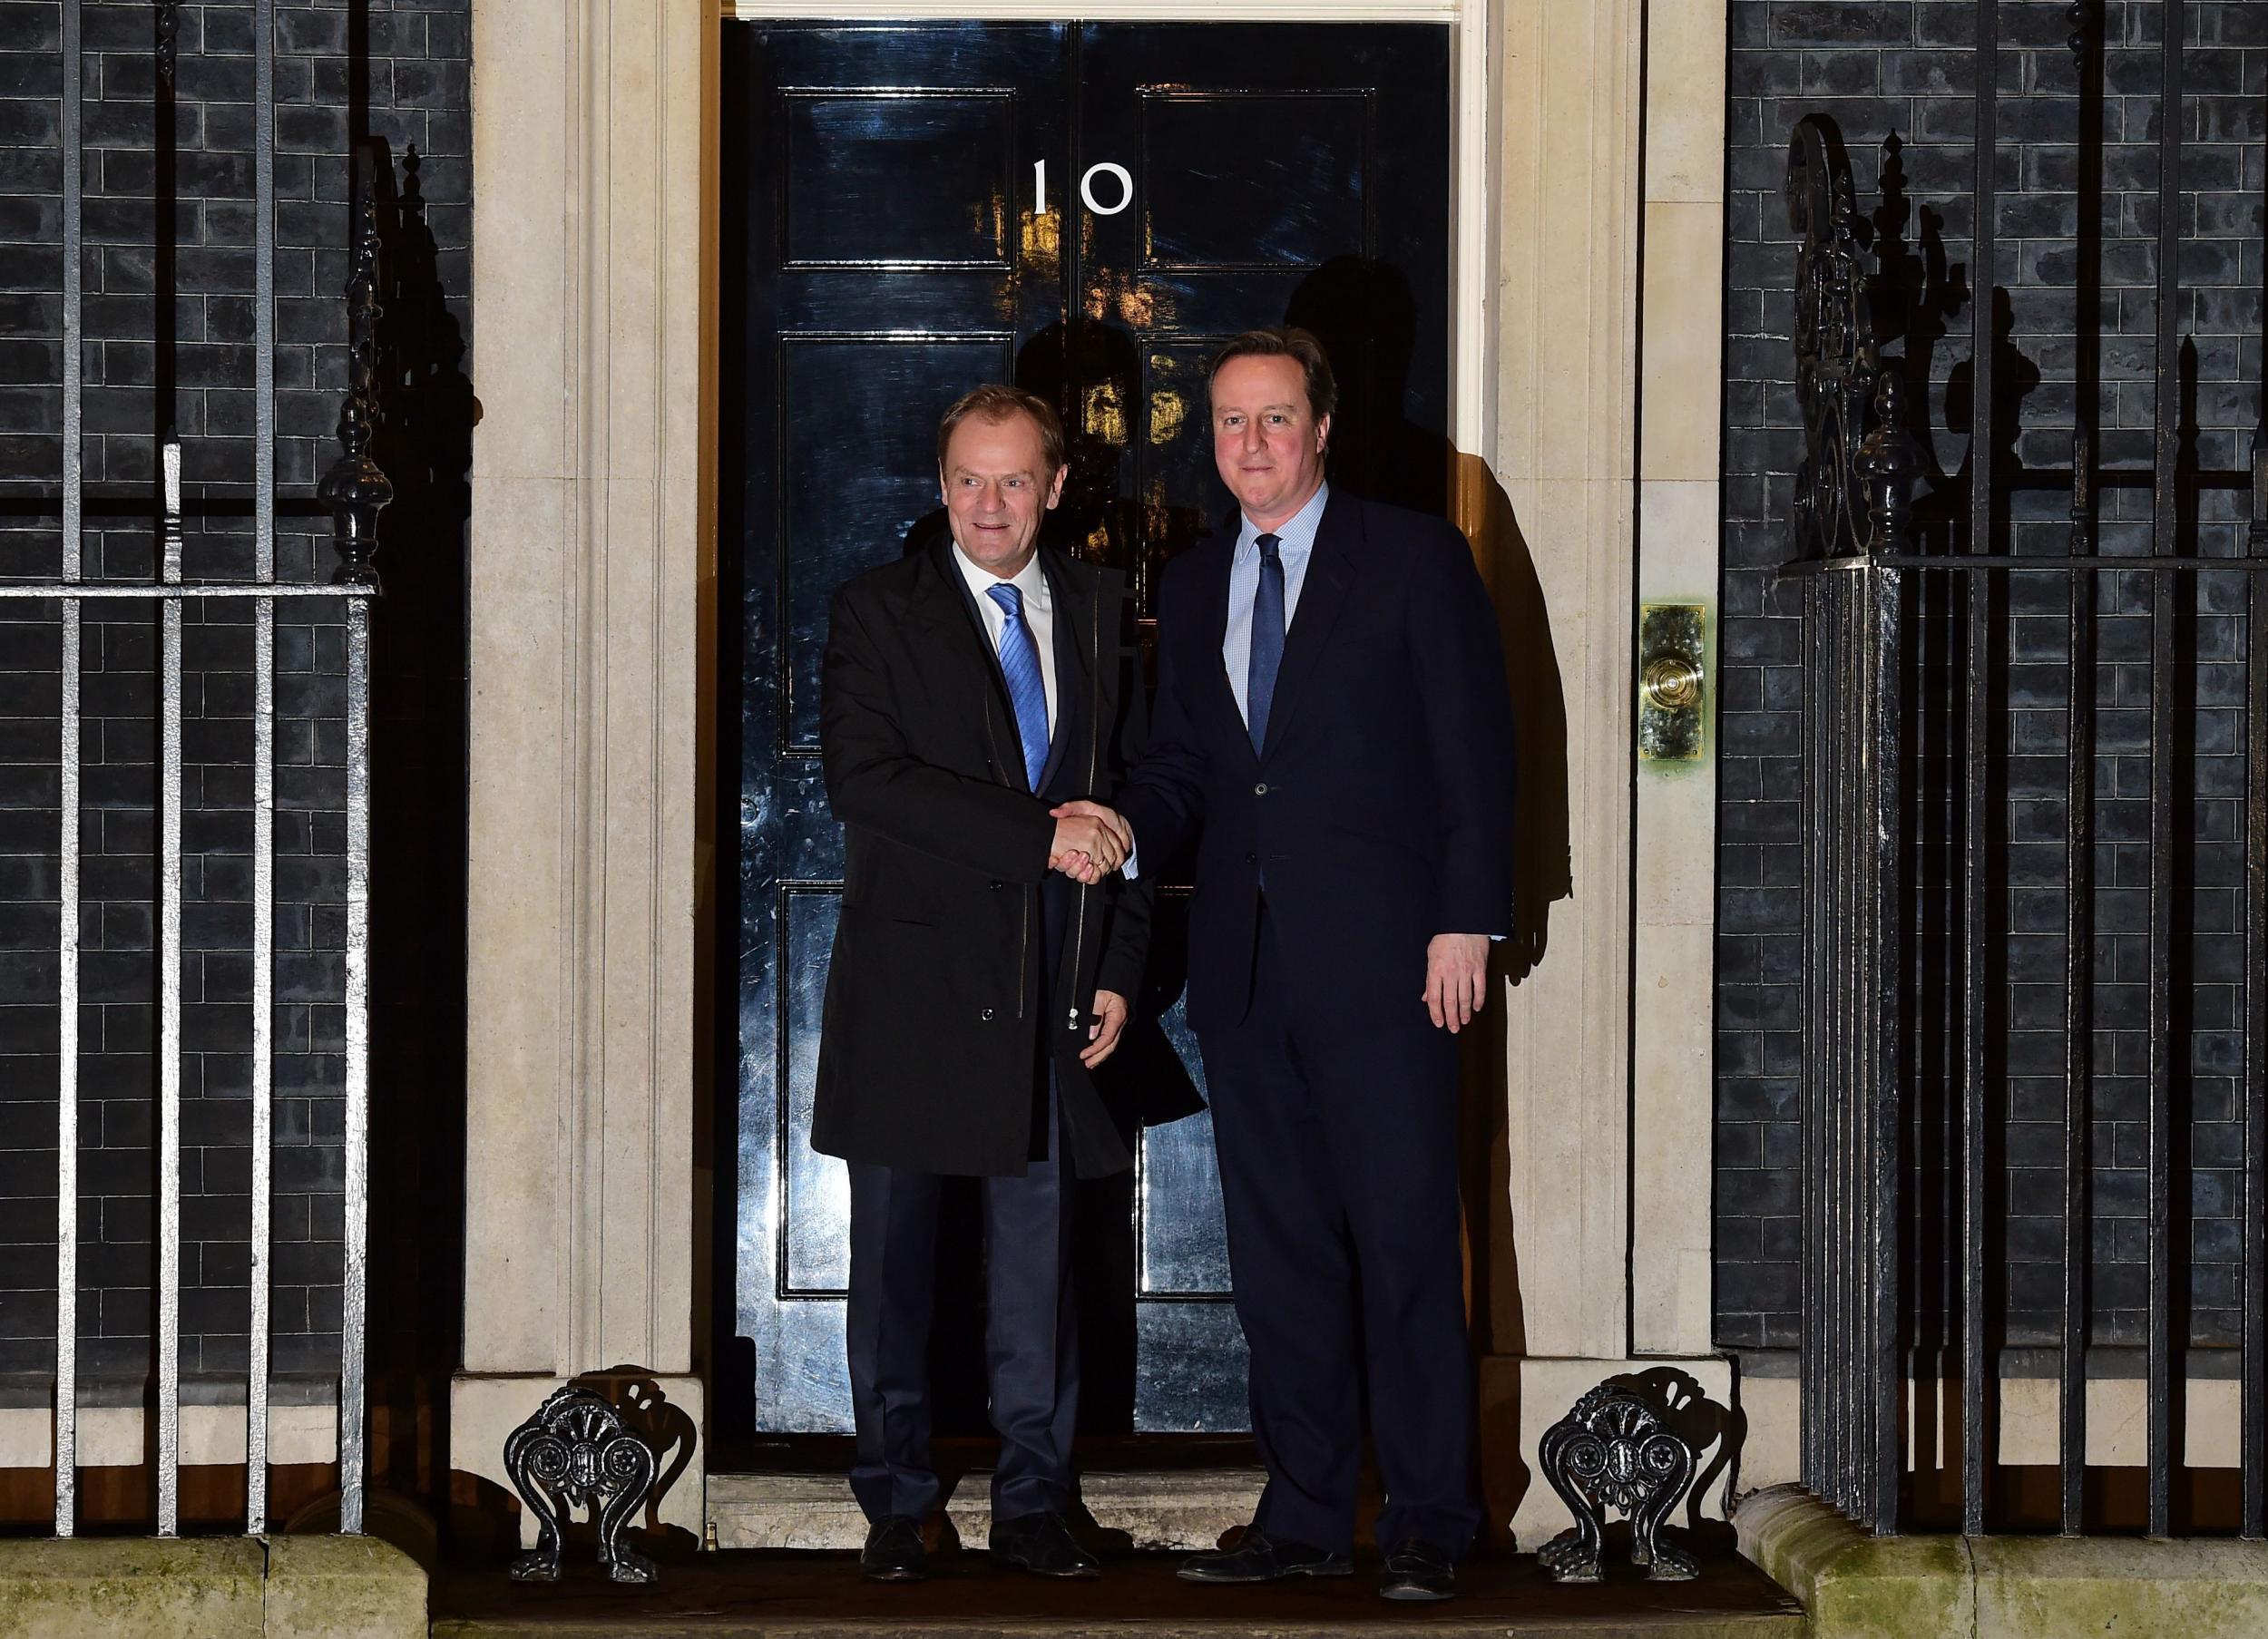 David Cameron with Donald Tusk after talks in Downing Street